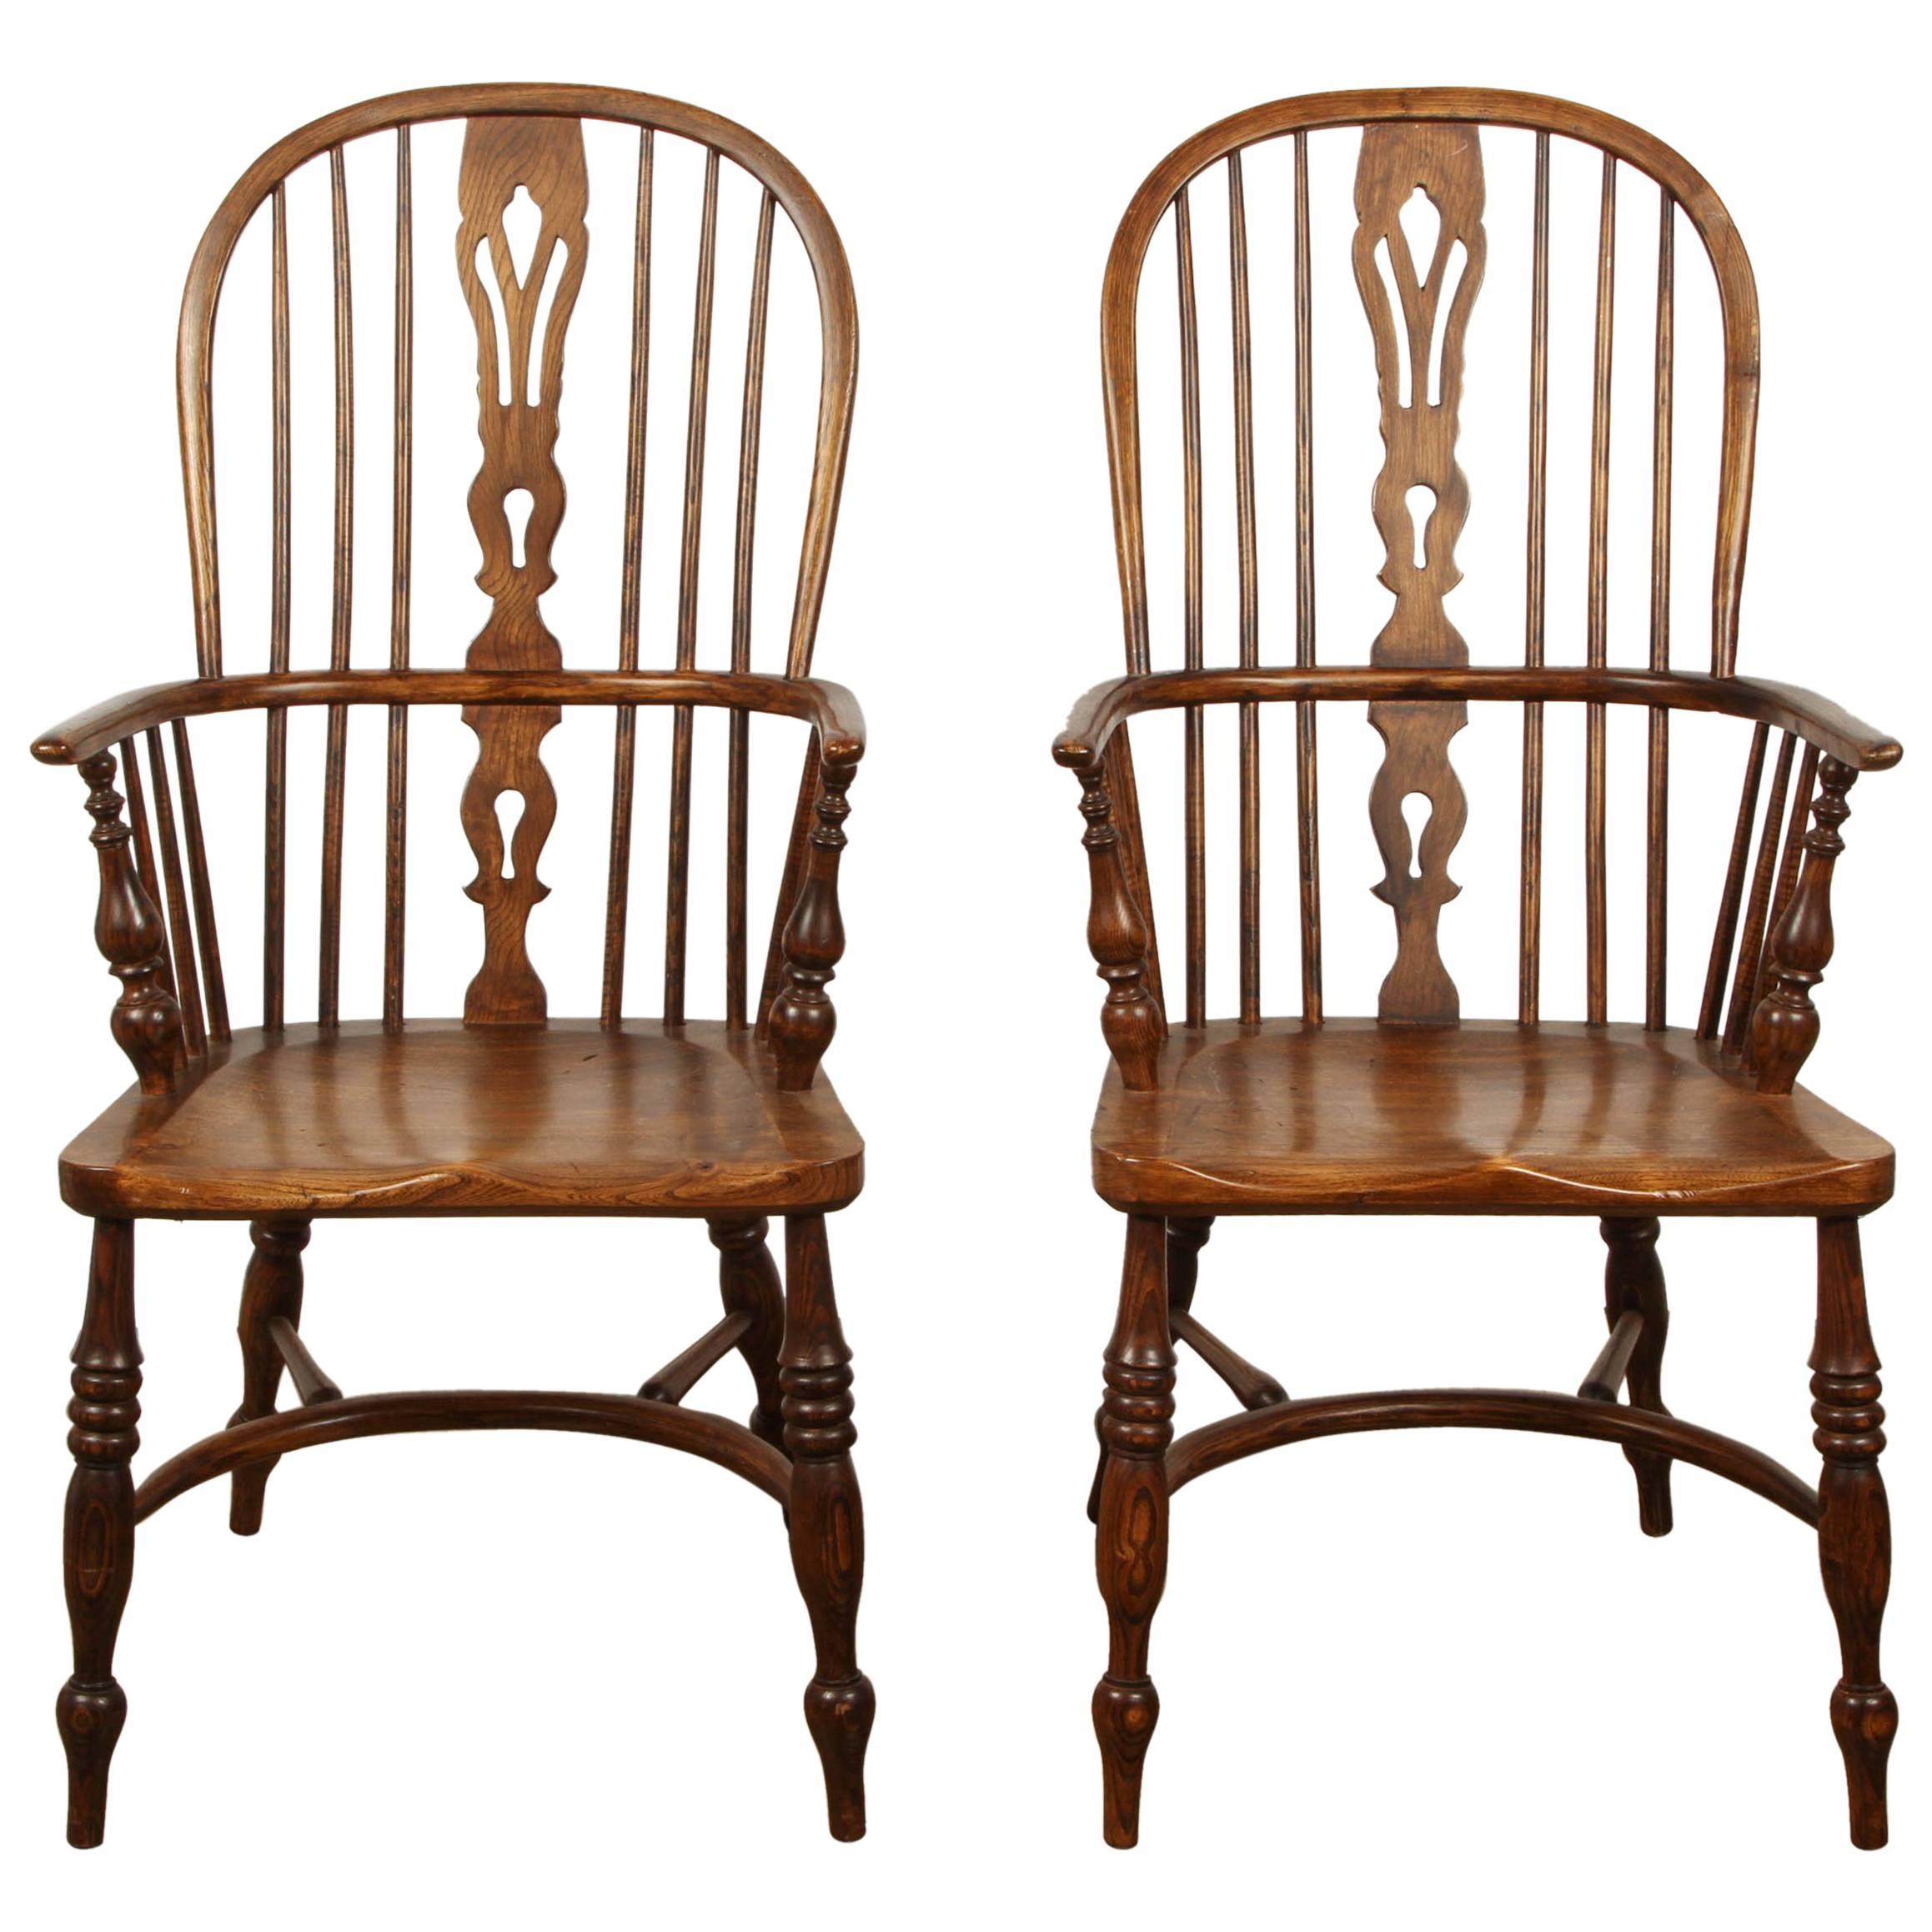 One English Yew High Back Chair